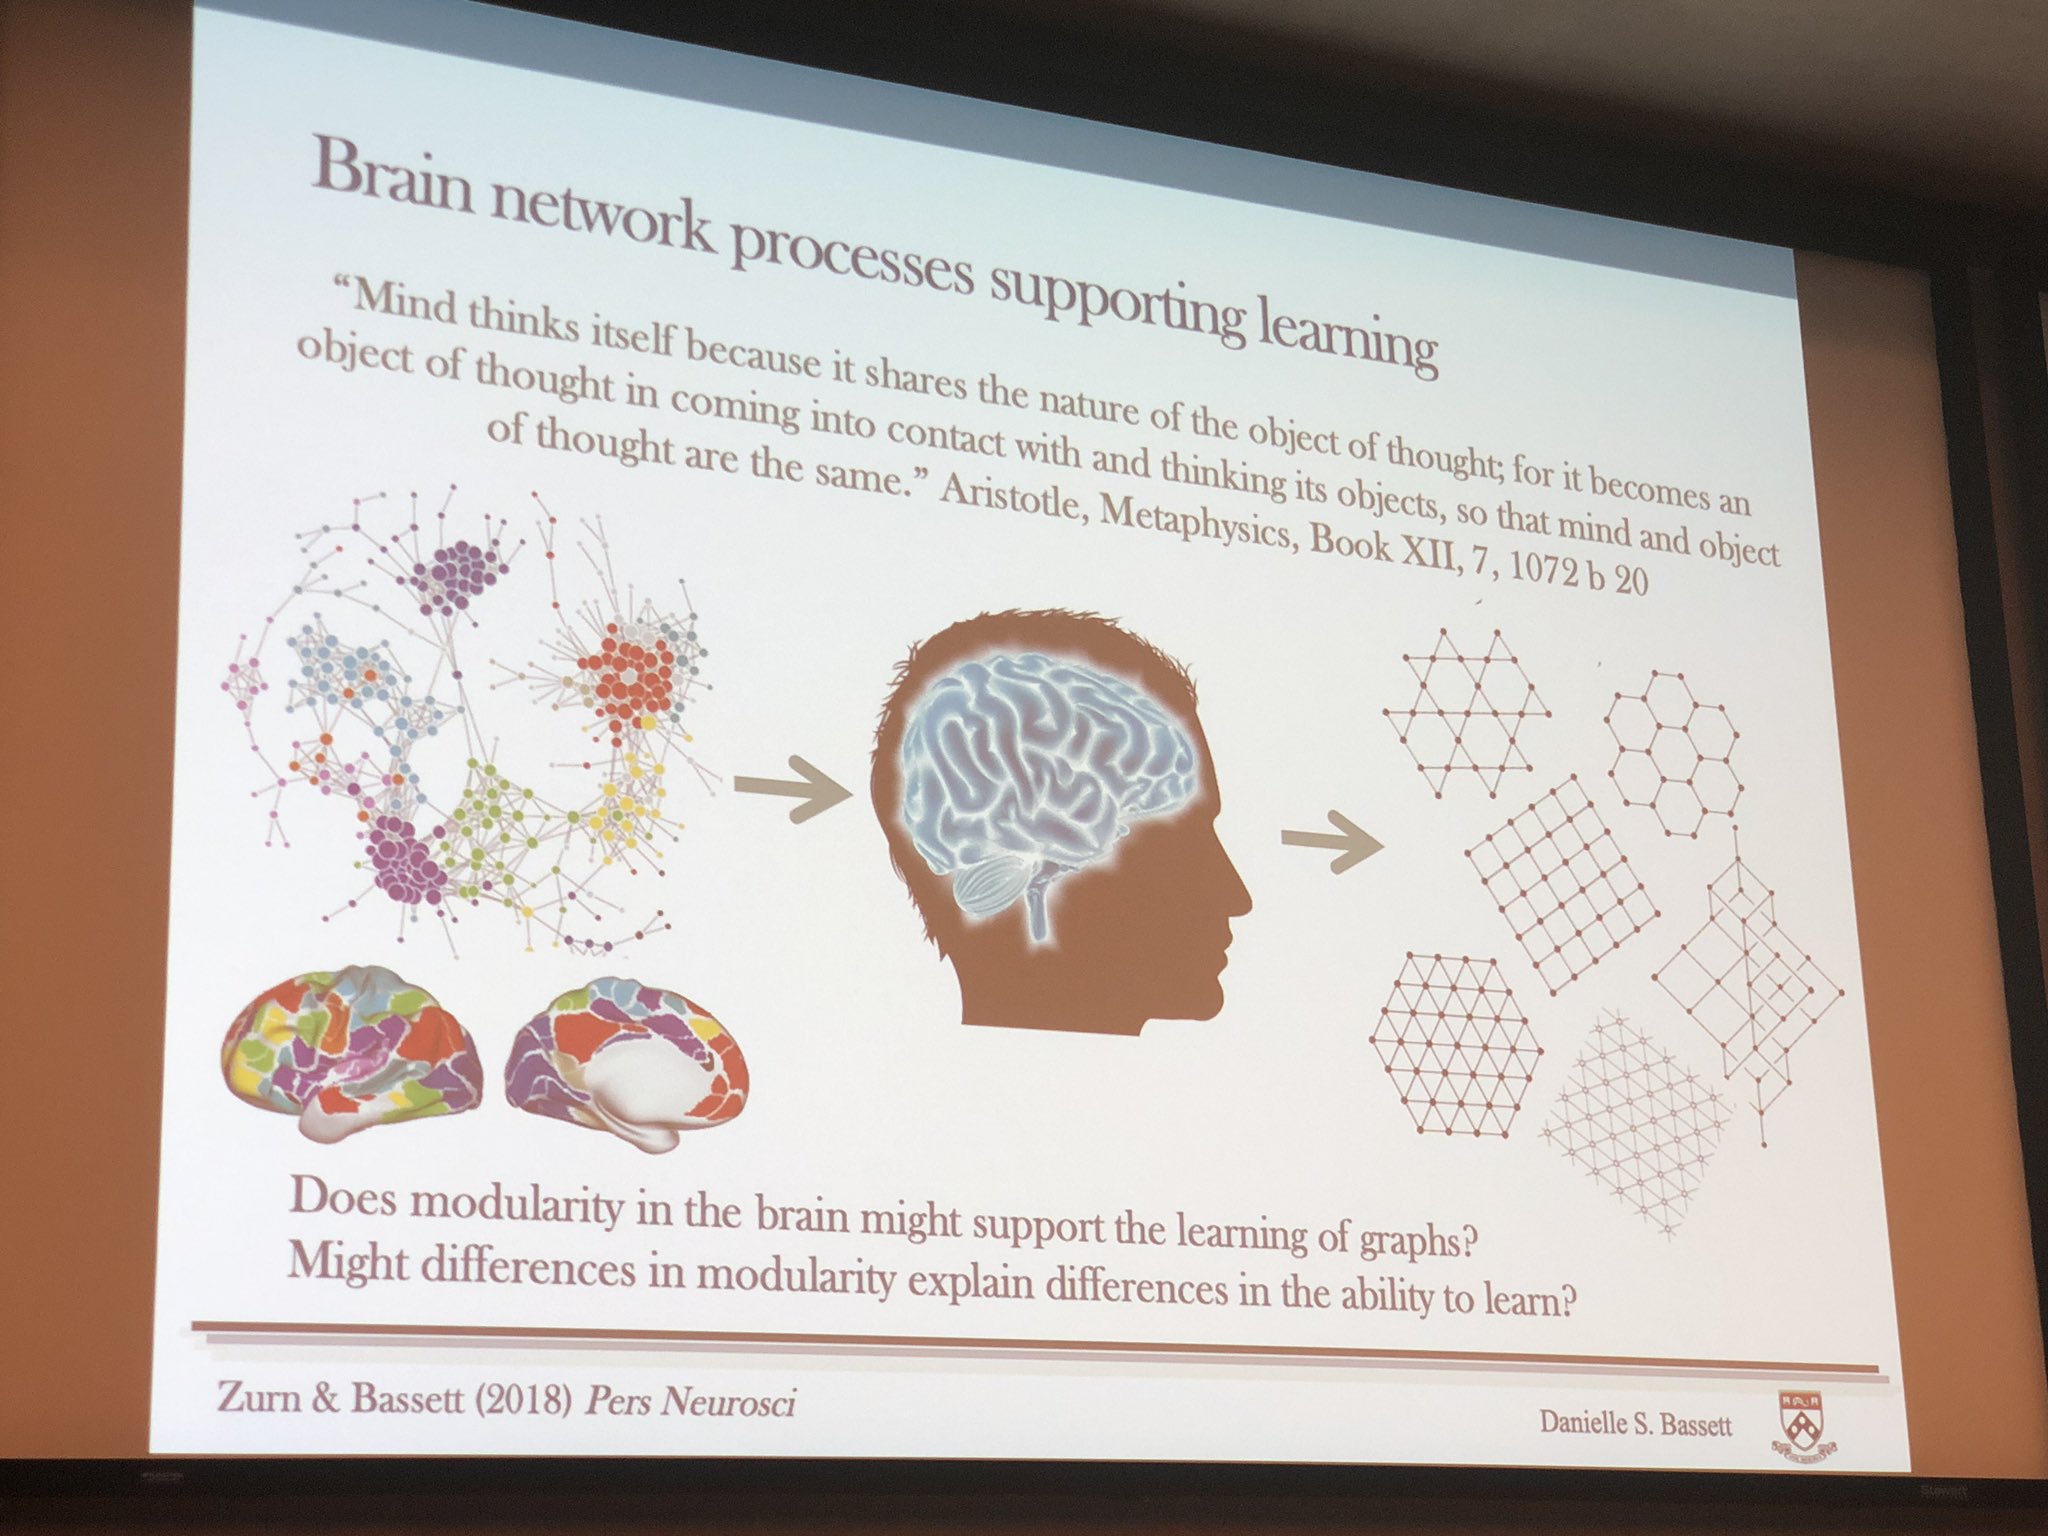 Slide from Bassett's talk on the mind understanding networks because it is a network itself